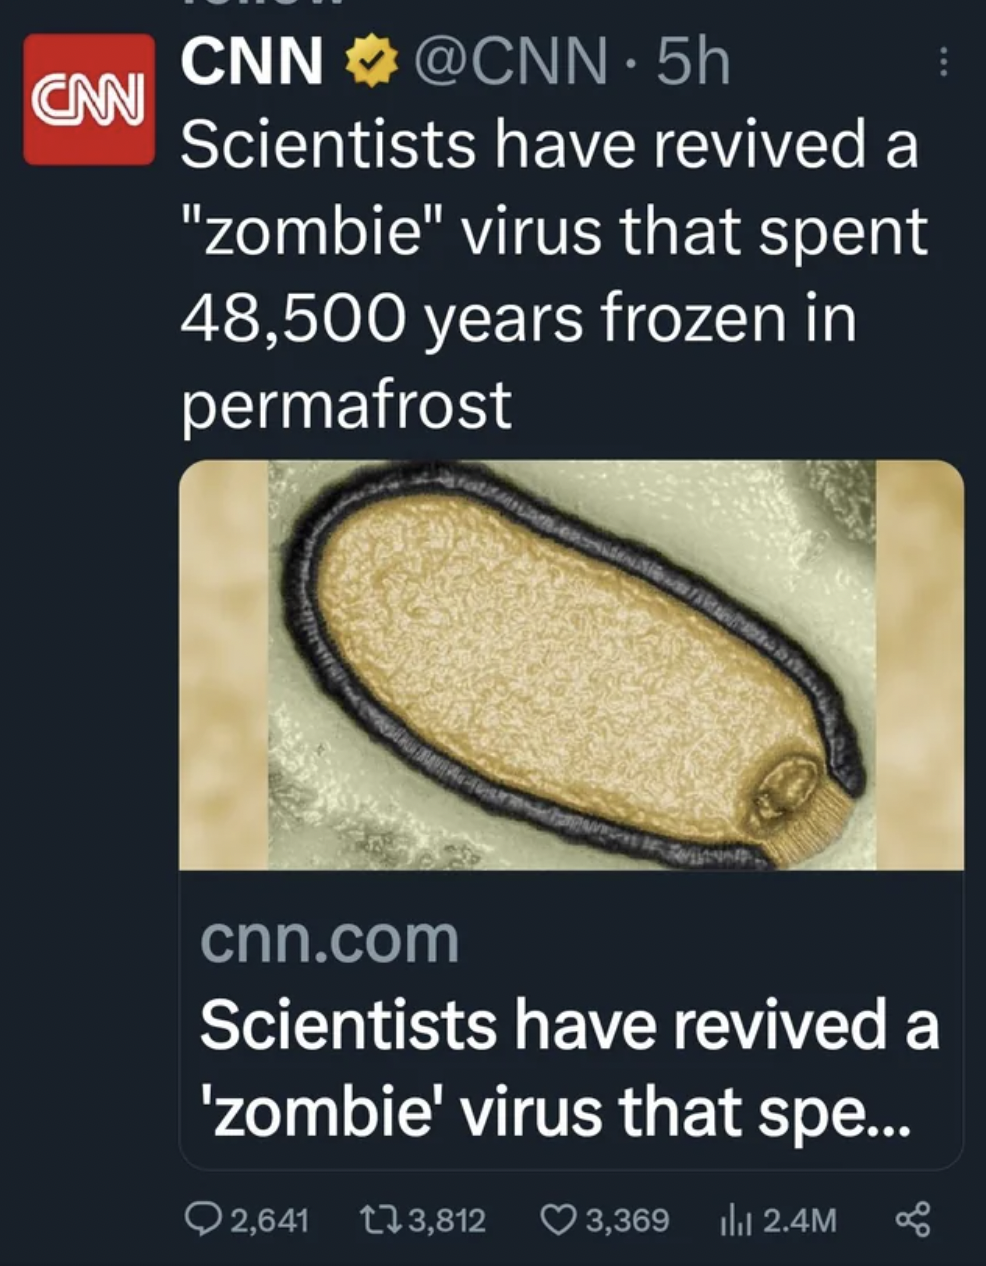 Dumb pics - material - Can Cnn. 5h Scientists have revived a